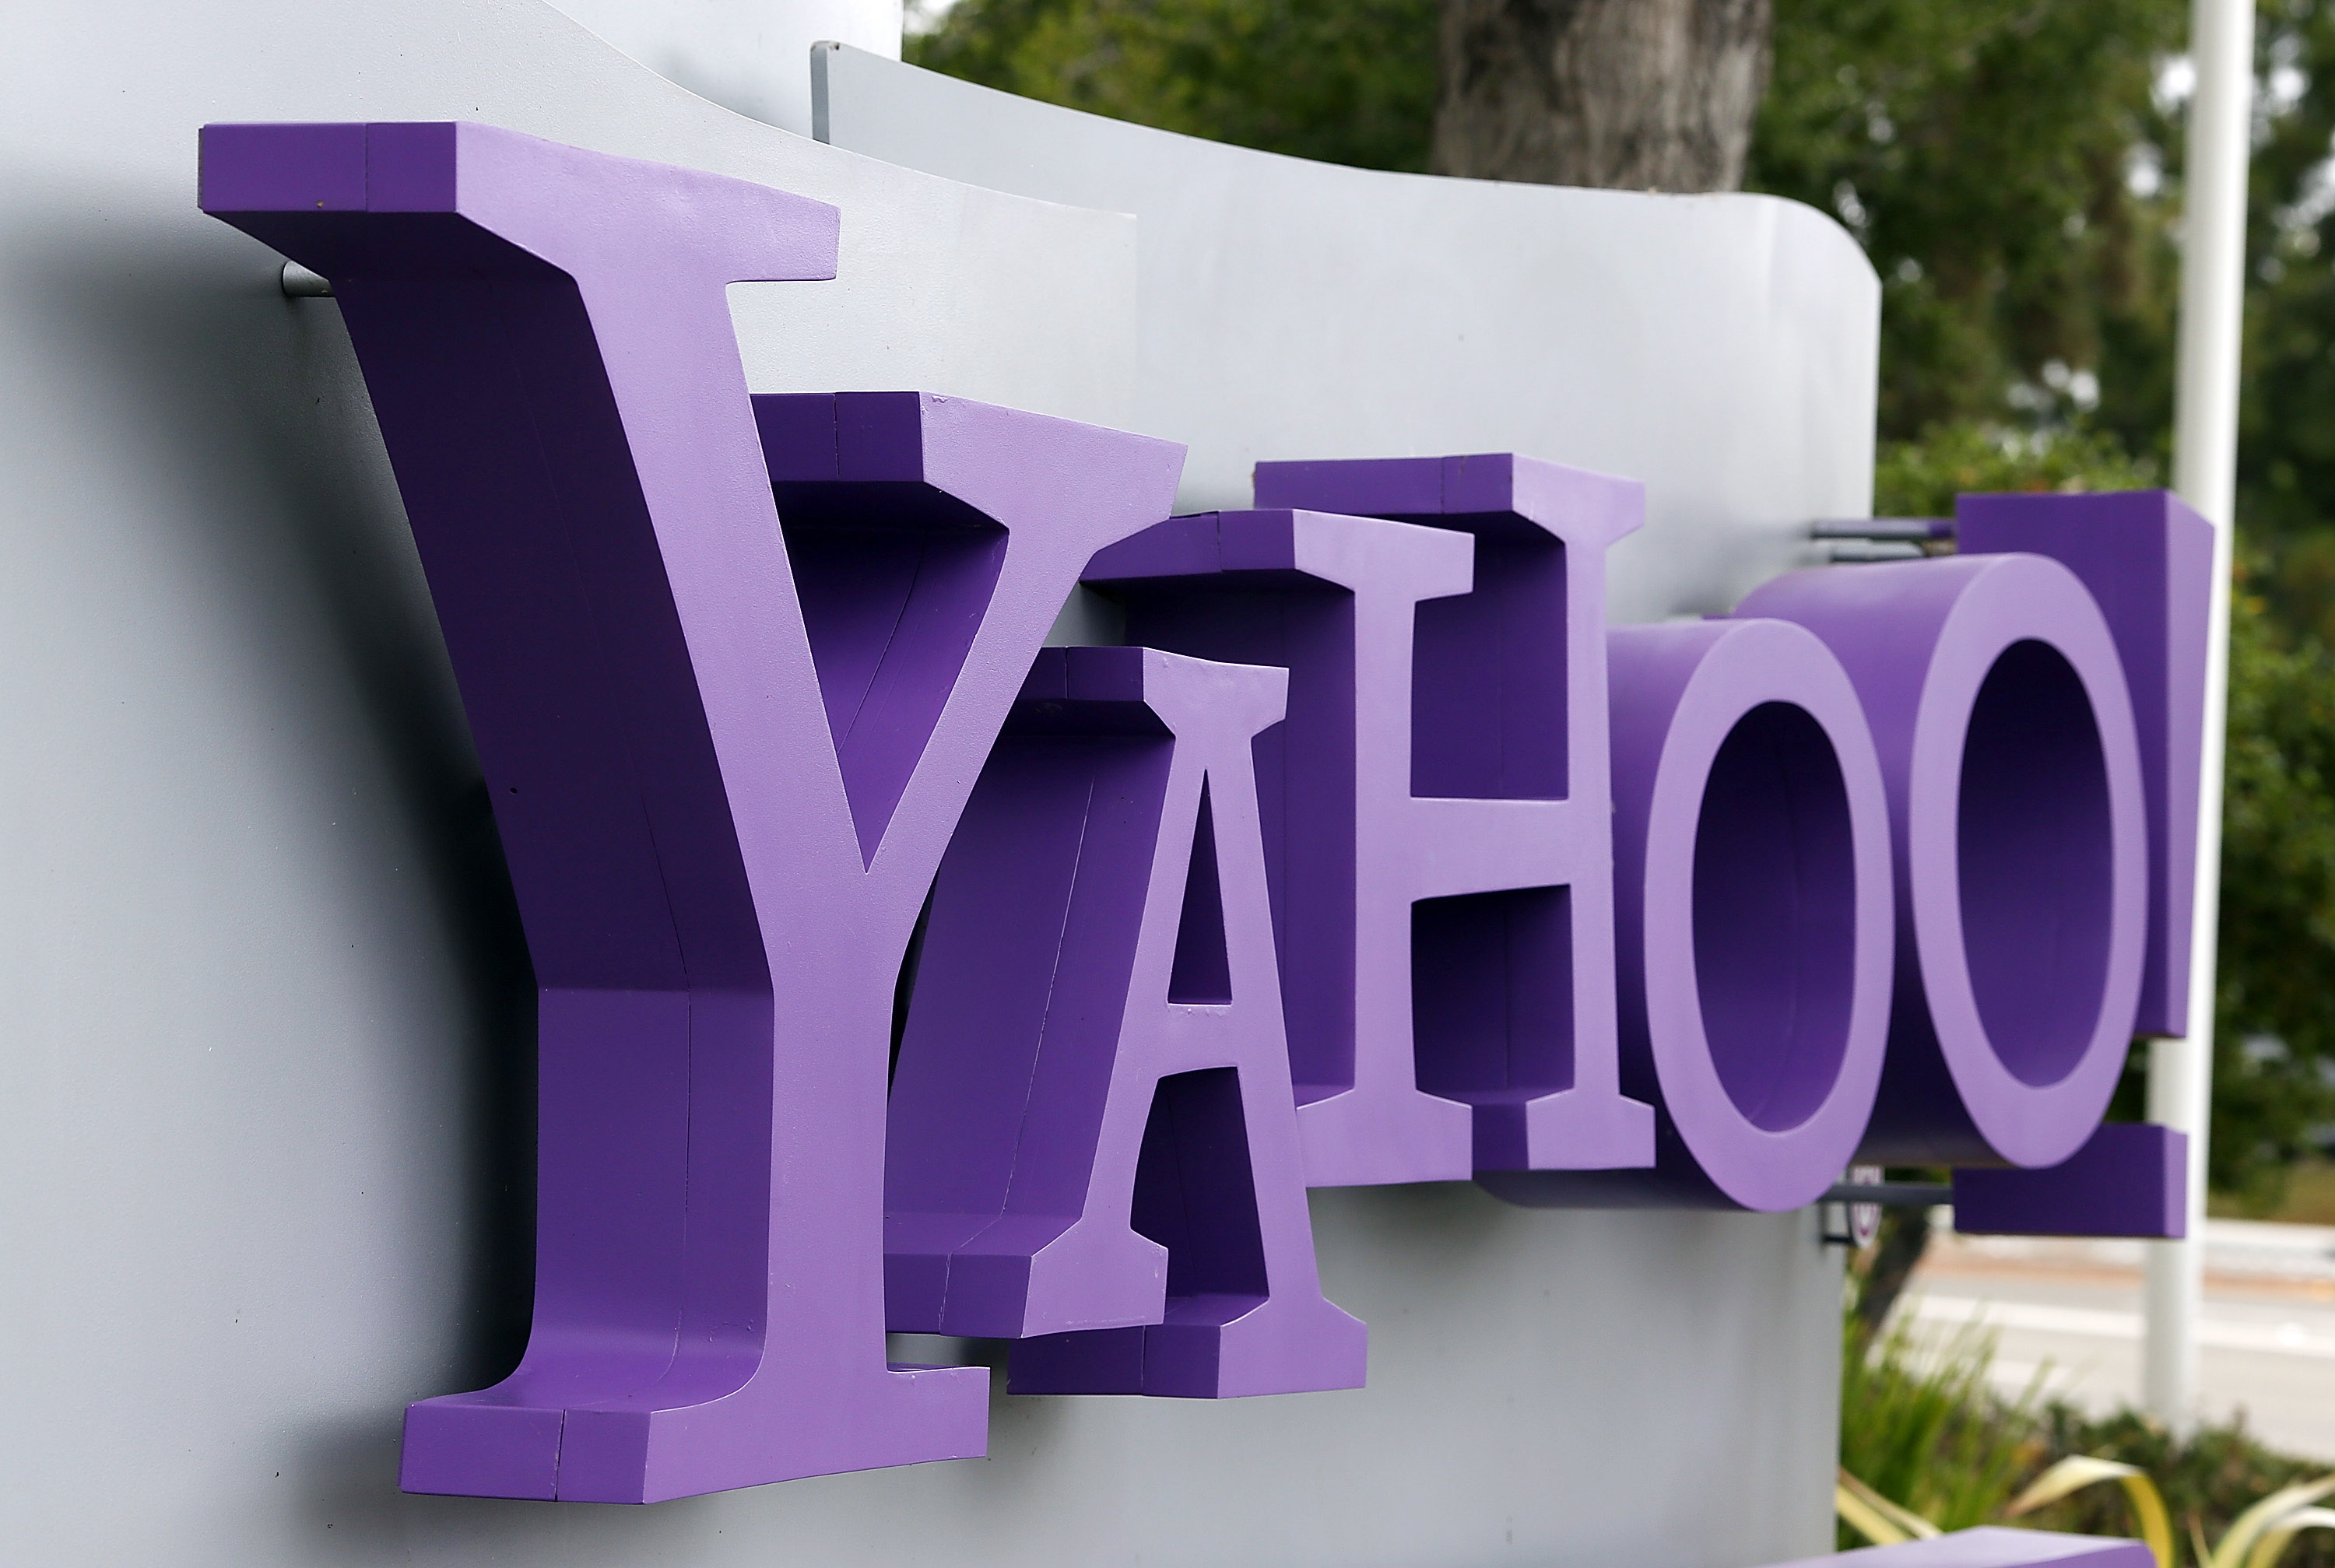 SUNNYVALE, CA - JULY 17: The Yahoo logo is displayed in front of the Yahoo headqarters on July 17, 2012 in Sunnyvale, California. Yahoo will report Q2 earnings one day after former Google executive Marissa Mayer was named as the new CEO. Photo by Justin Sullivan/Getty Images/AFP